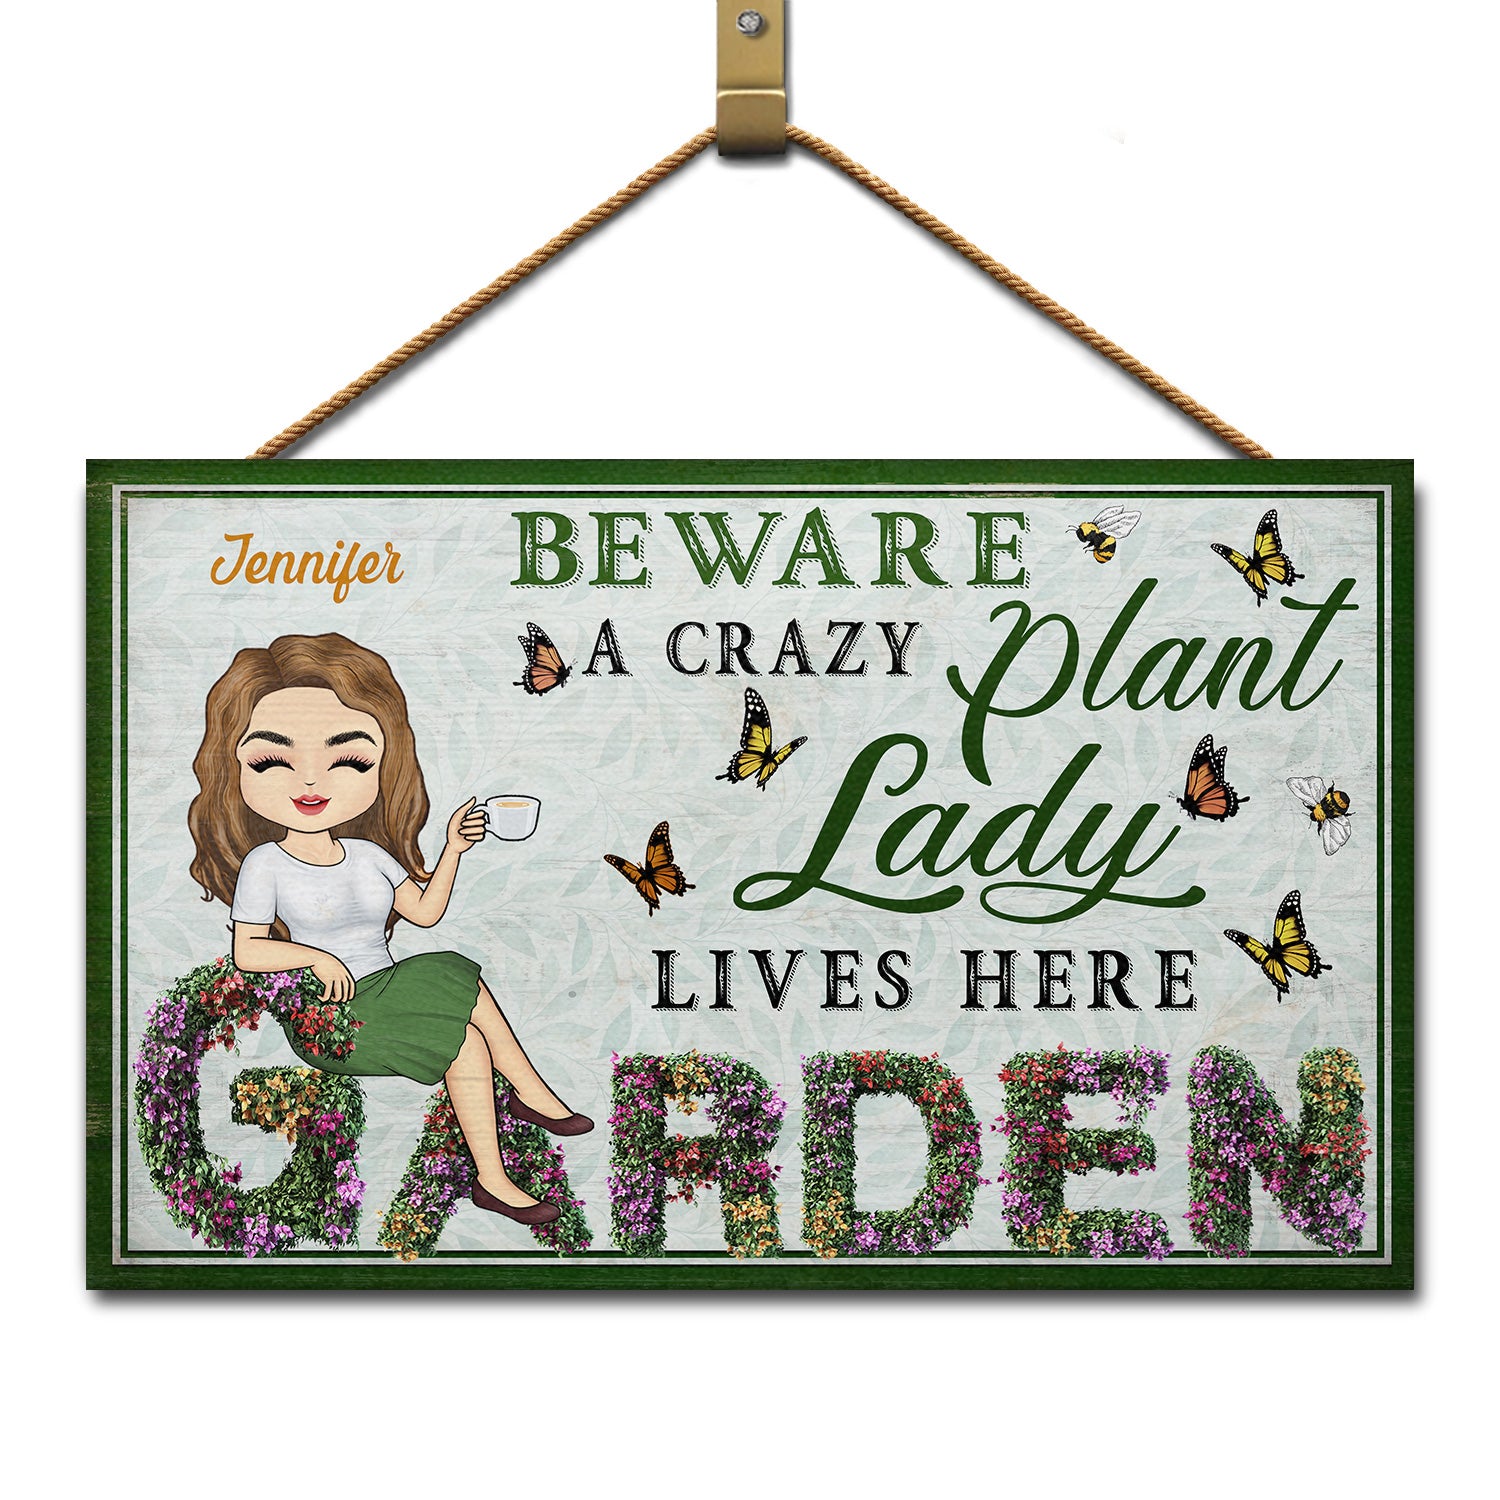 And Into The Garden I Go - Beware A Crazy Plant Lady Lives Here - Birthday, Housewarming Gift For Her, Him, Gardener, Outdoor Decor - Personalized Custom Wood Rectangle Sign